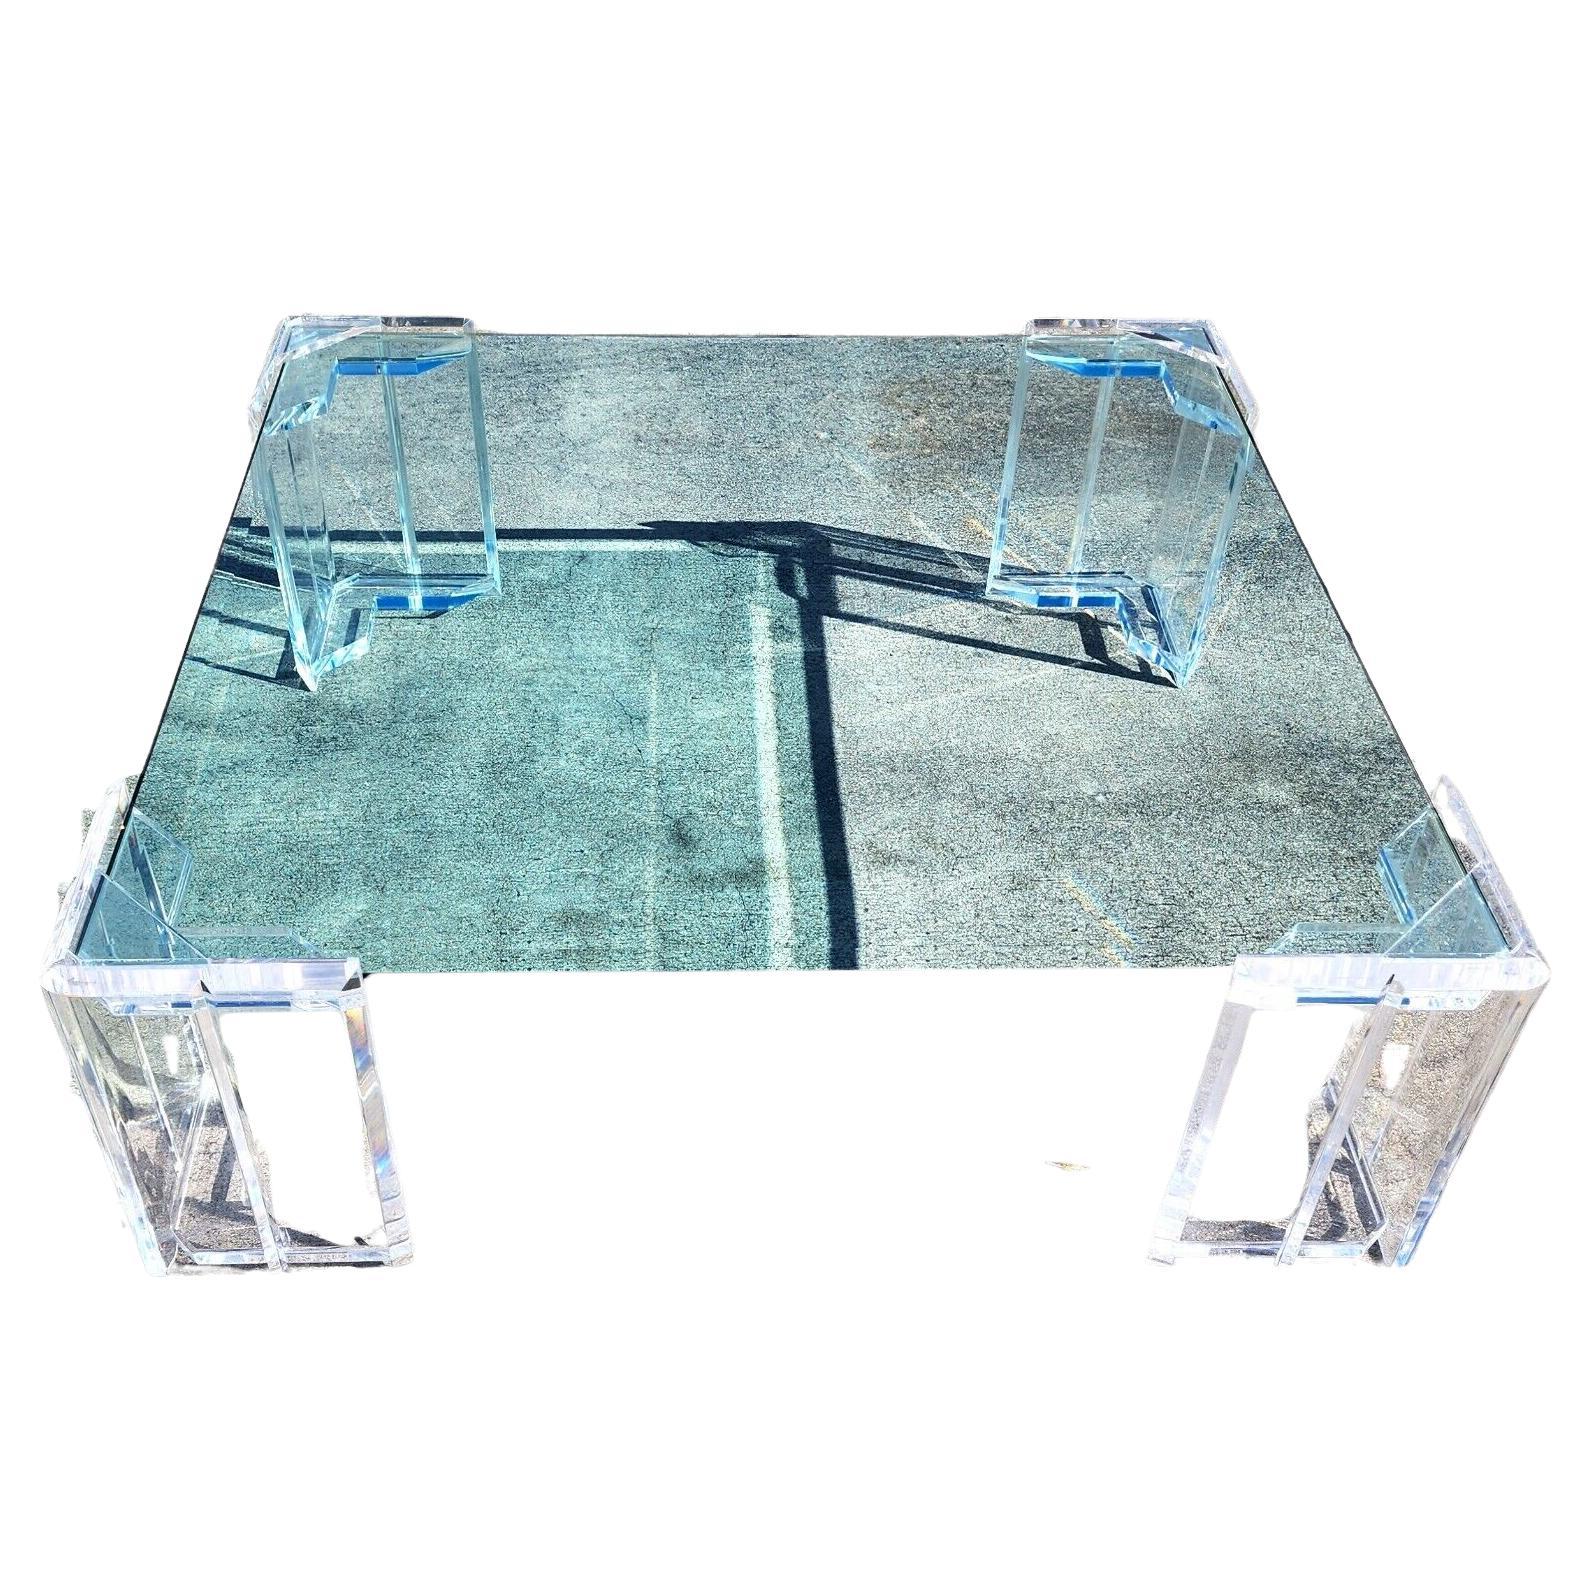 For FULL item description click on CONTINUE READING at the bottom of this page.

Offering One Of Our Recent Palm Beach Estate Fine Furniture Acquisitions Of A
MCM Lucite Cocktail Coffee Table 1970s

Approximate Measurements in Inches
16.25